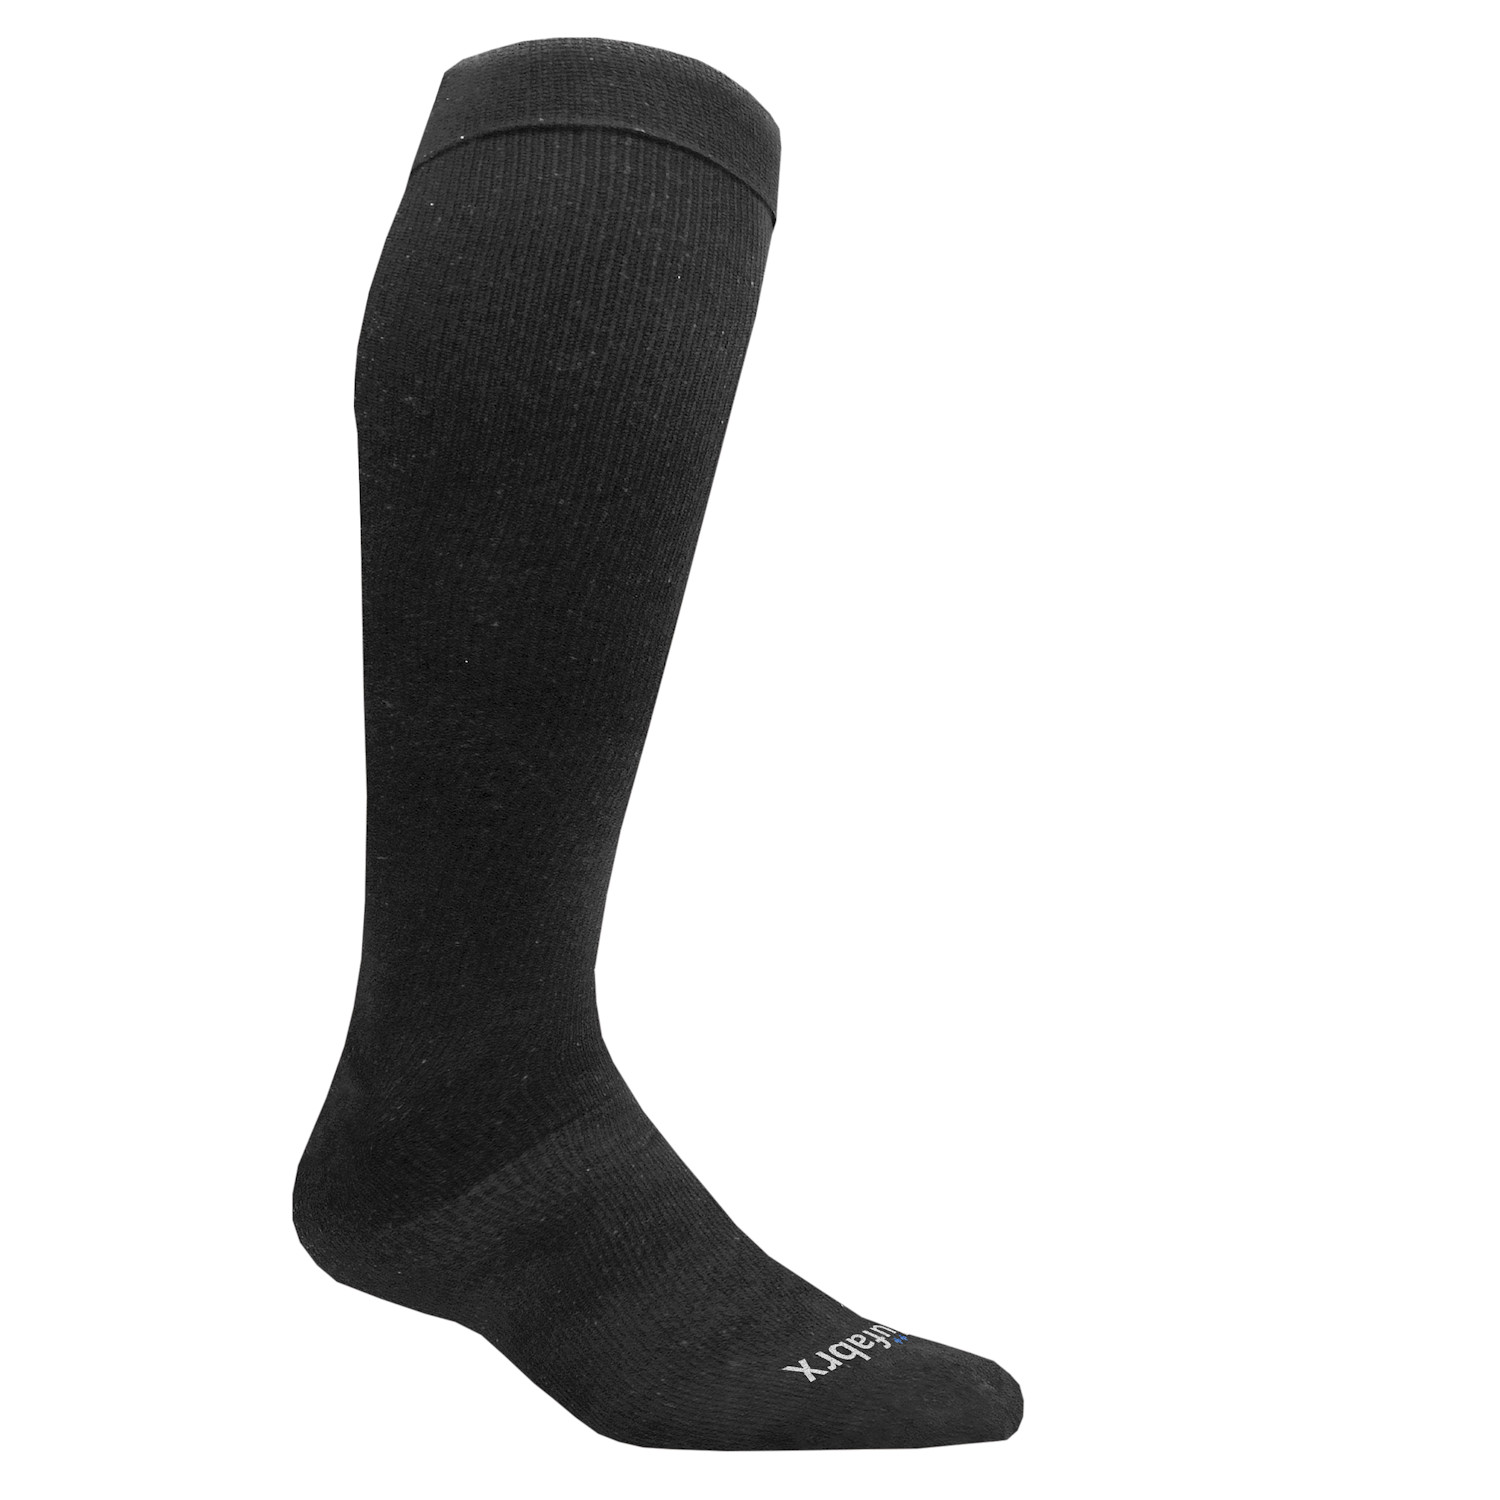 Nufabrx Unisex Moderate Compression Medicated Socks | Support Plus